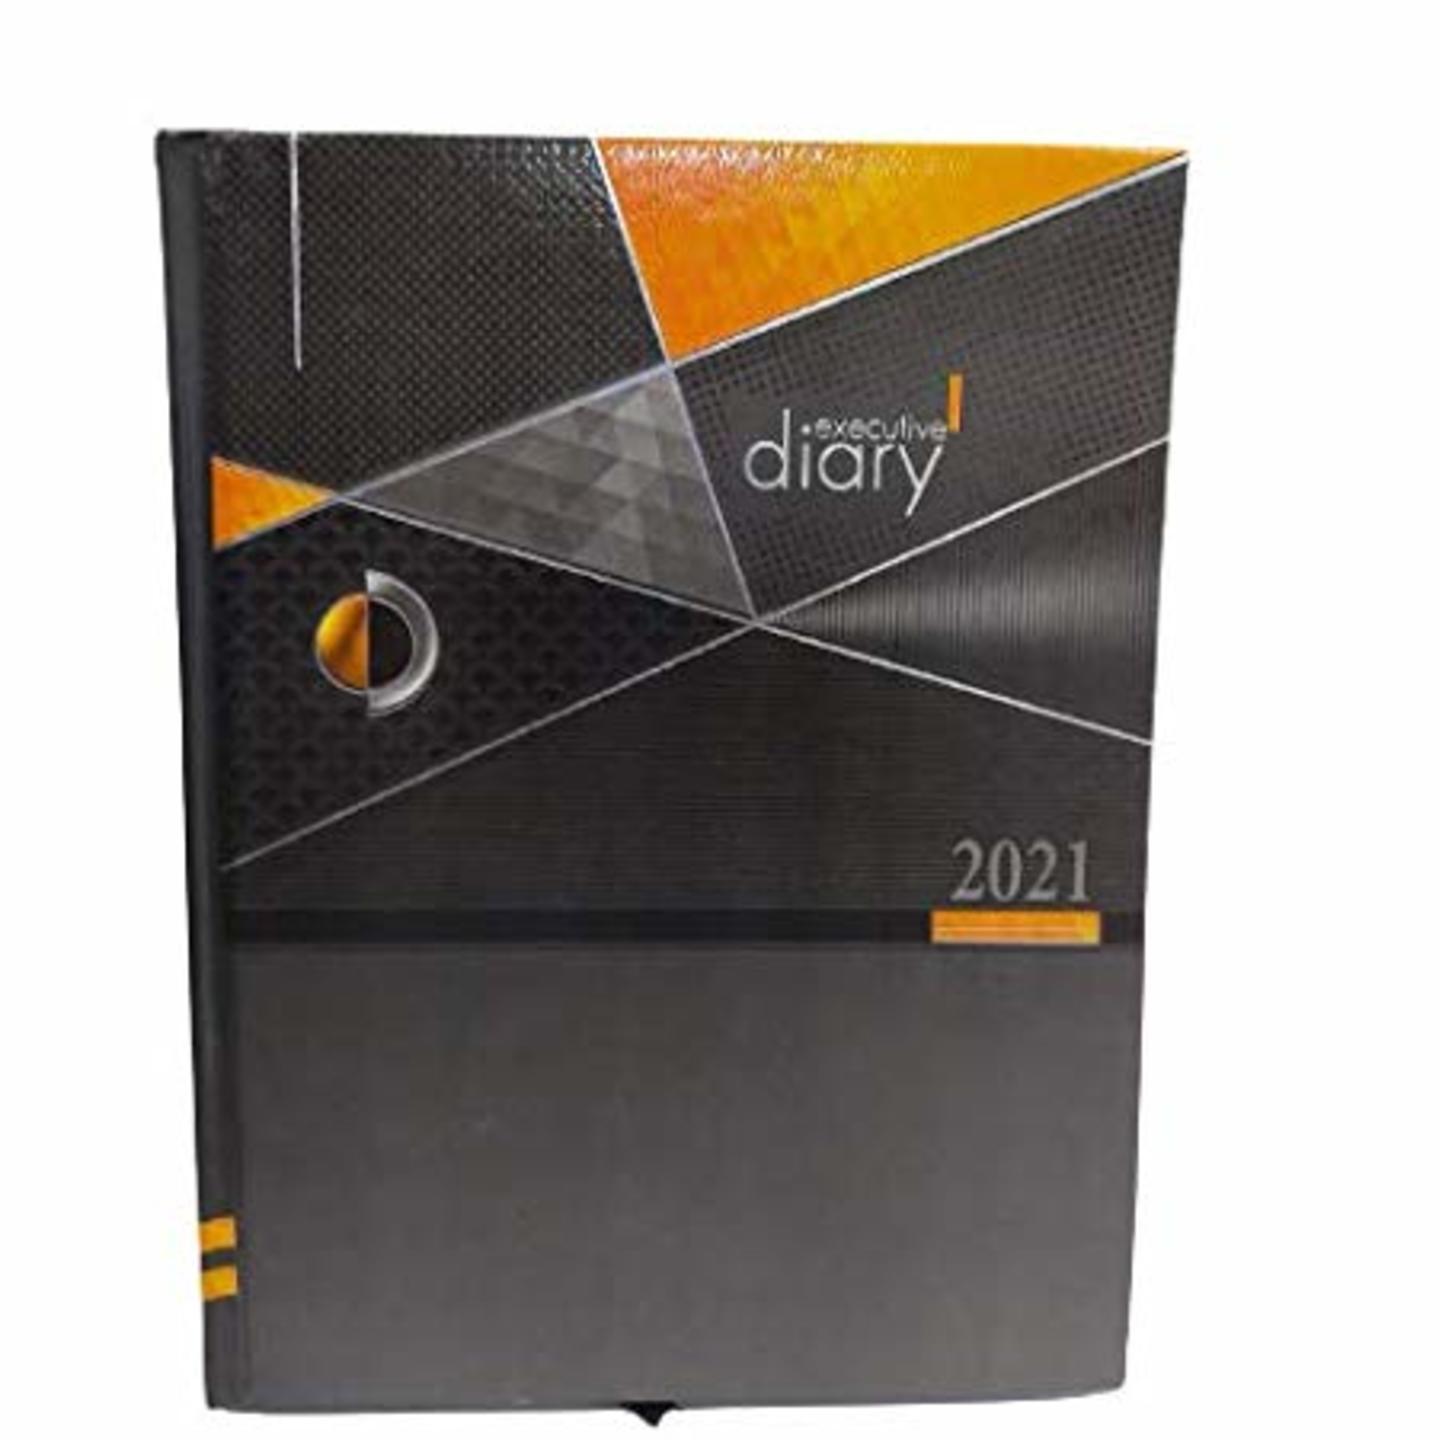 SMKT™2021 Diary|Superior Quality Diary|Sunday Full Page|EXCUTIVE Size UV Varnished Hardbound Dated 2021 Diary|Executive Diary Planner|2021 Monthly Planner|2021 Office Diary|25 X19 cm Size (APJ-210)